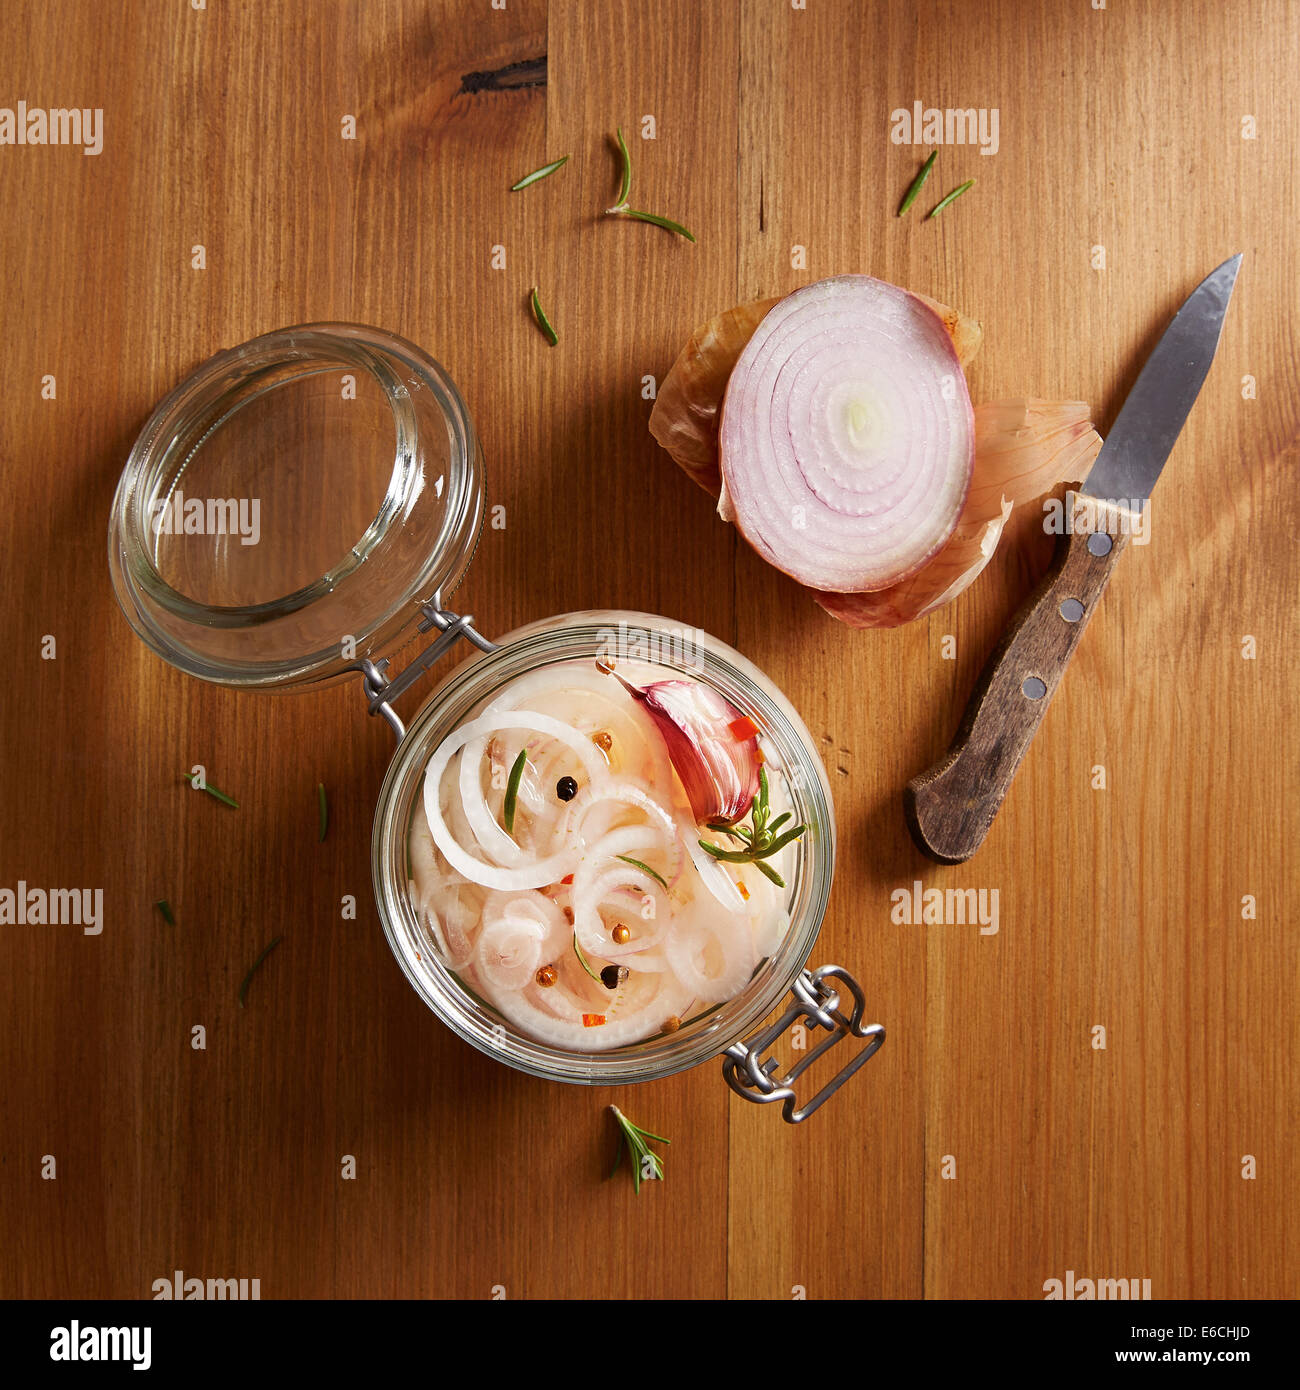 Homemade pickled onions with spice and garlic in a jar Stock Photo